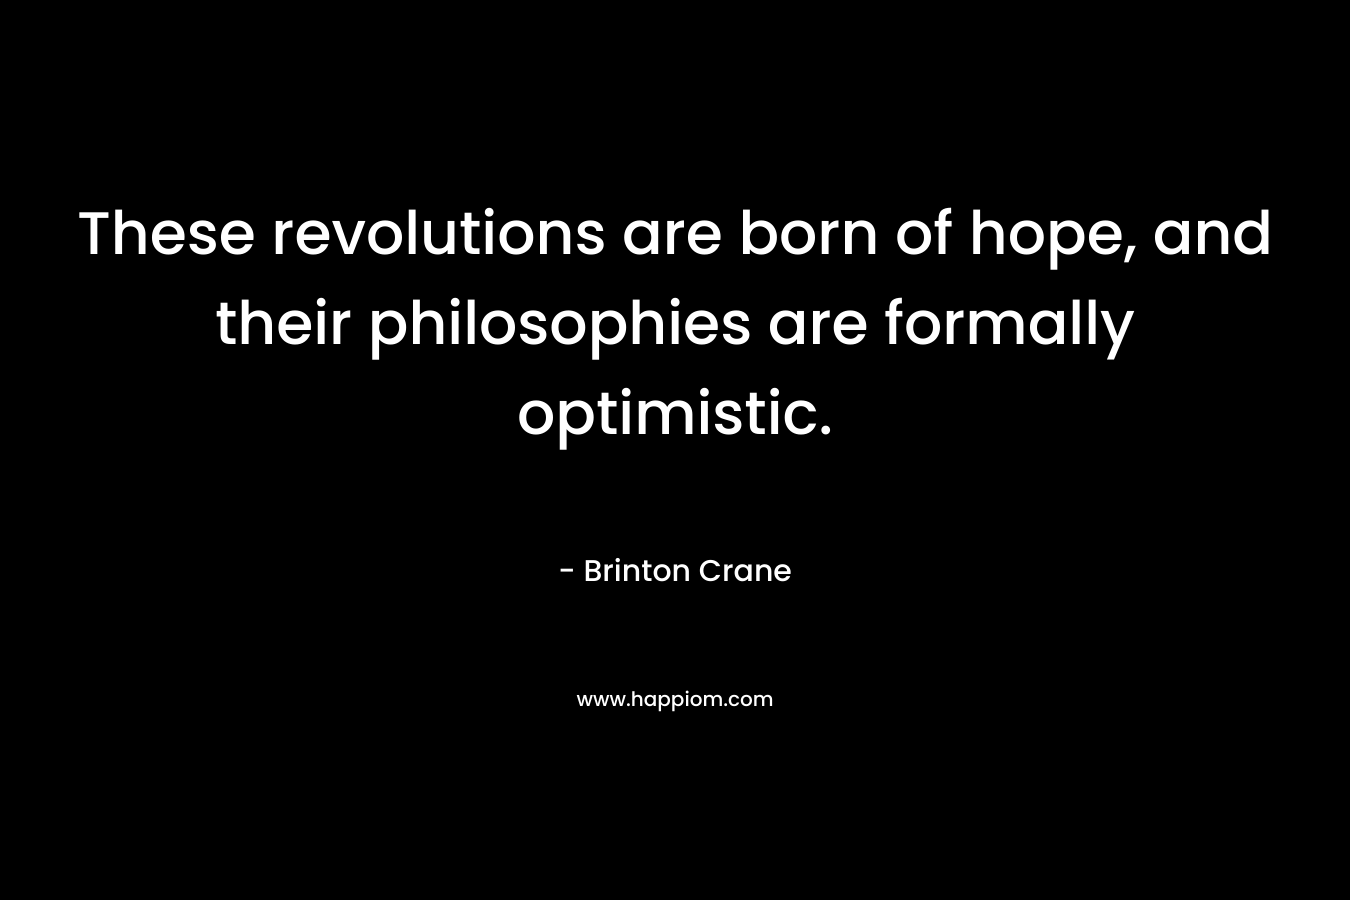 These revolutions are born of hope, and their philosophies are formally optimistic.